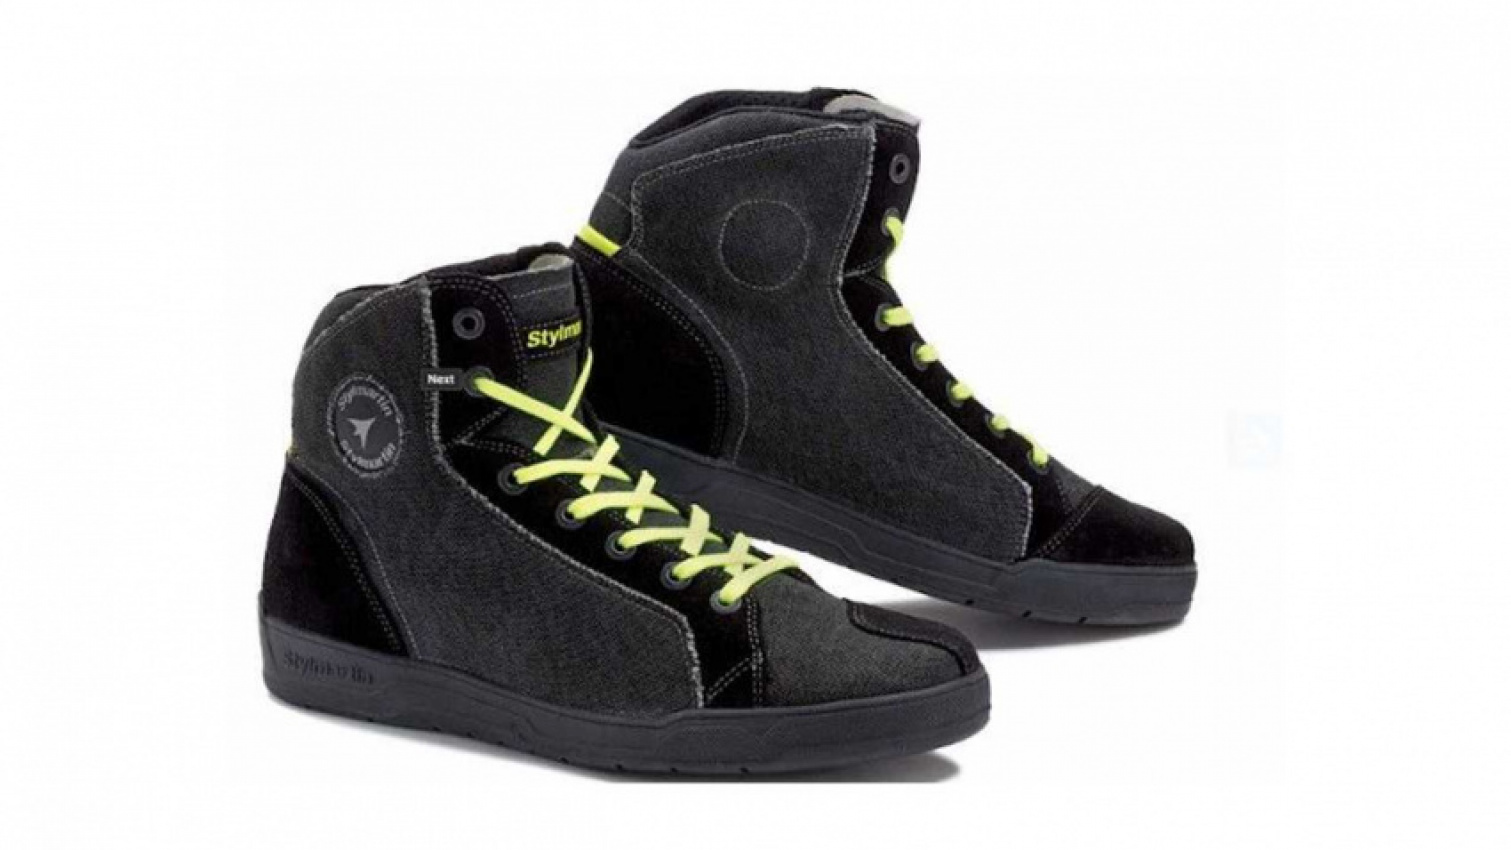 autos, cars, stylmartin introduces chic and sporty shadow motorcycle sneakers